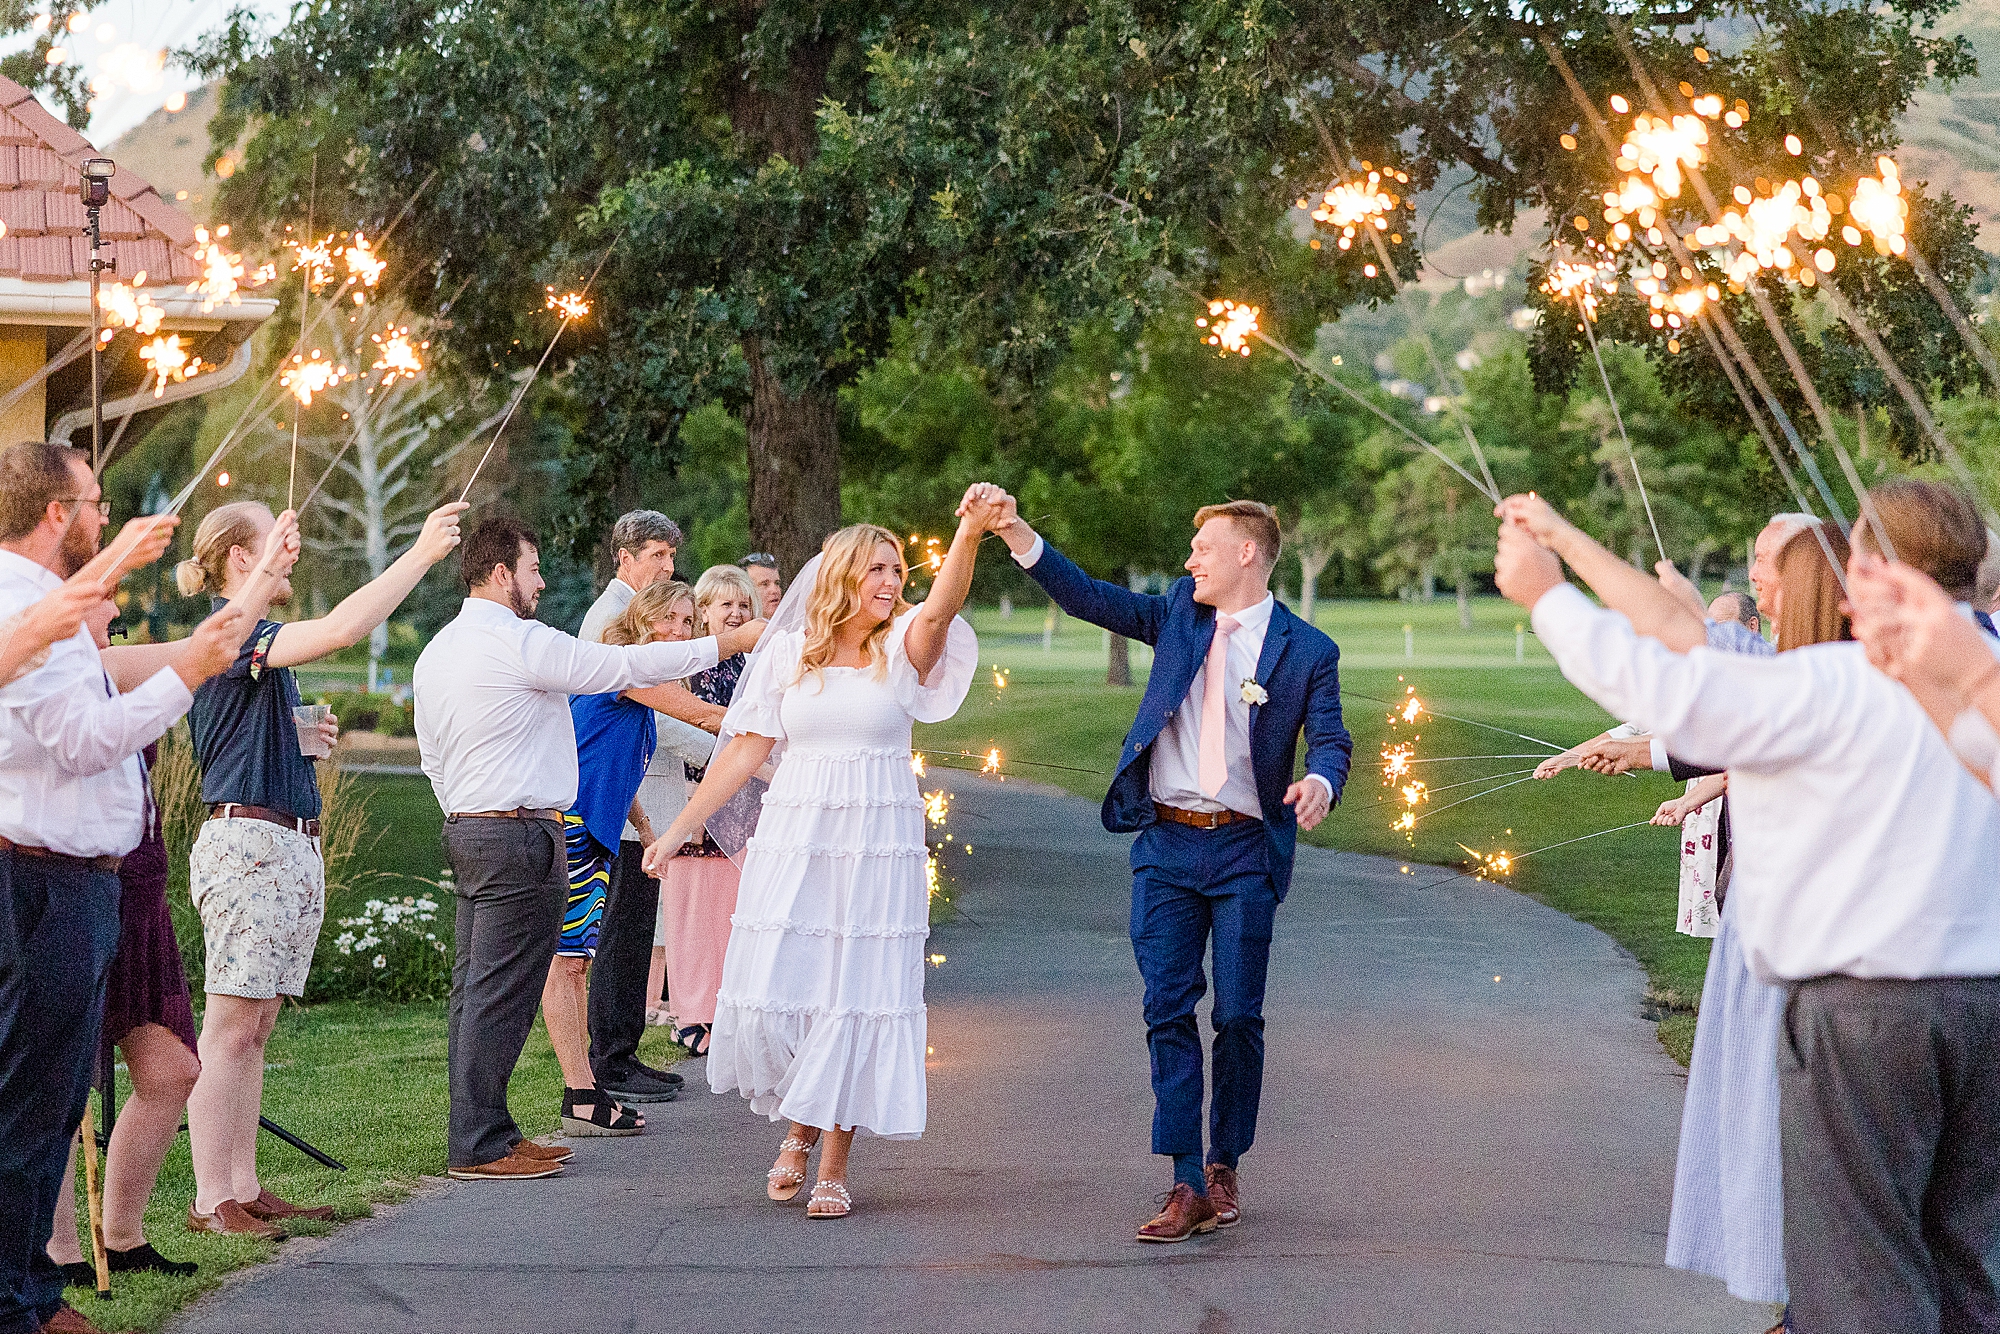 Newlyweds make a dazzling exit surrounded by a sea of sparkling sparklers.